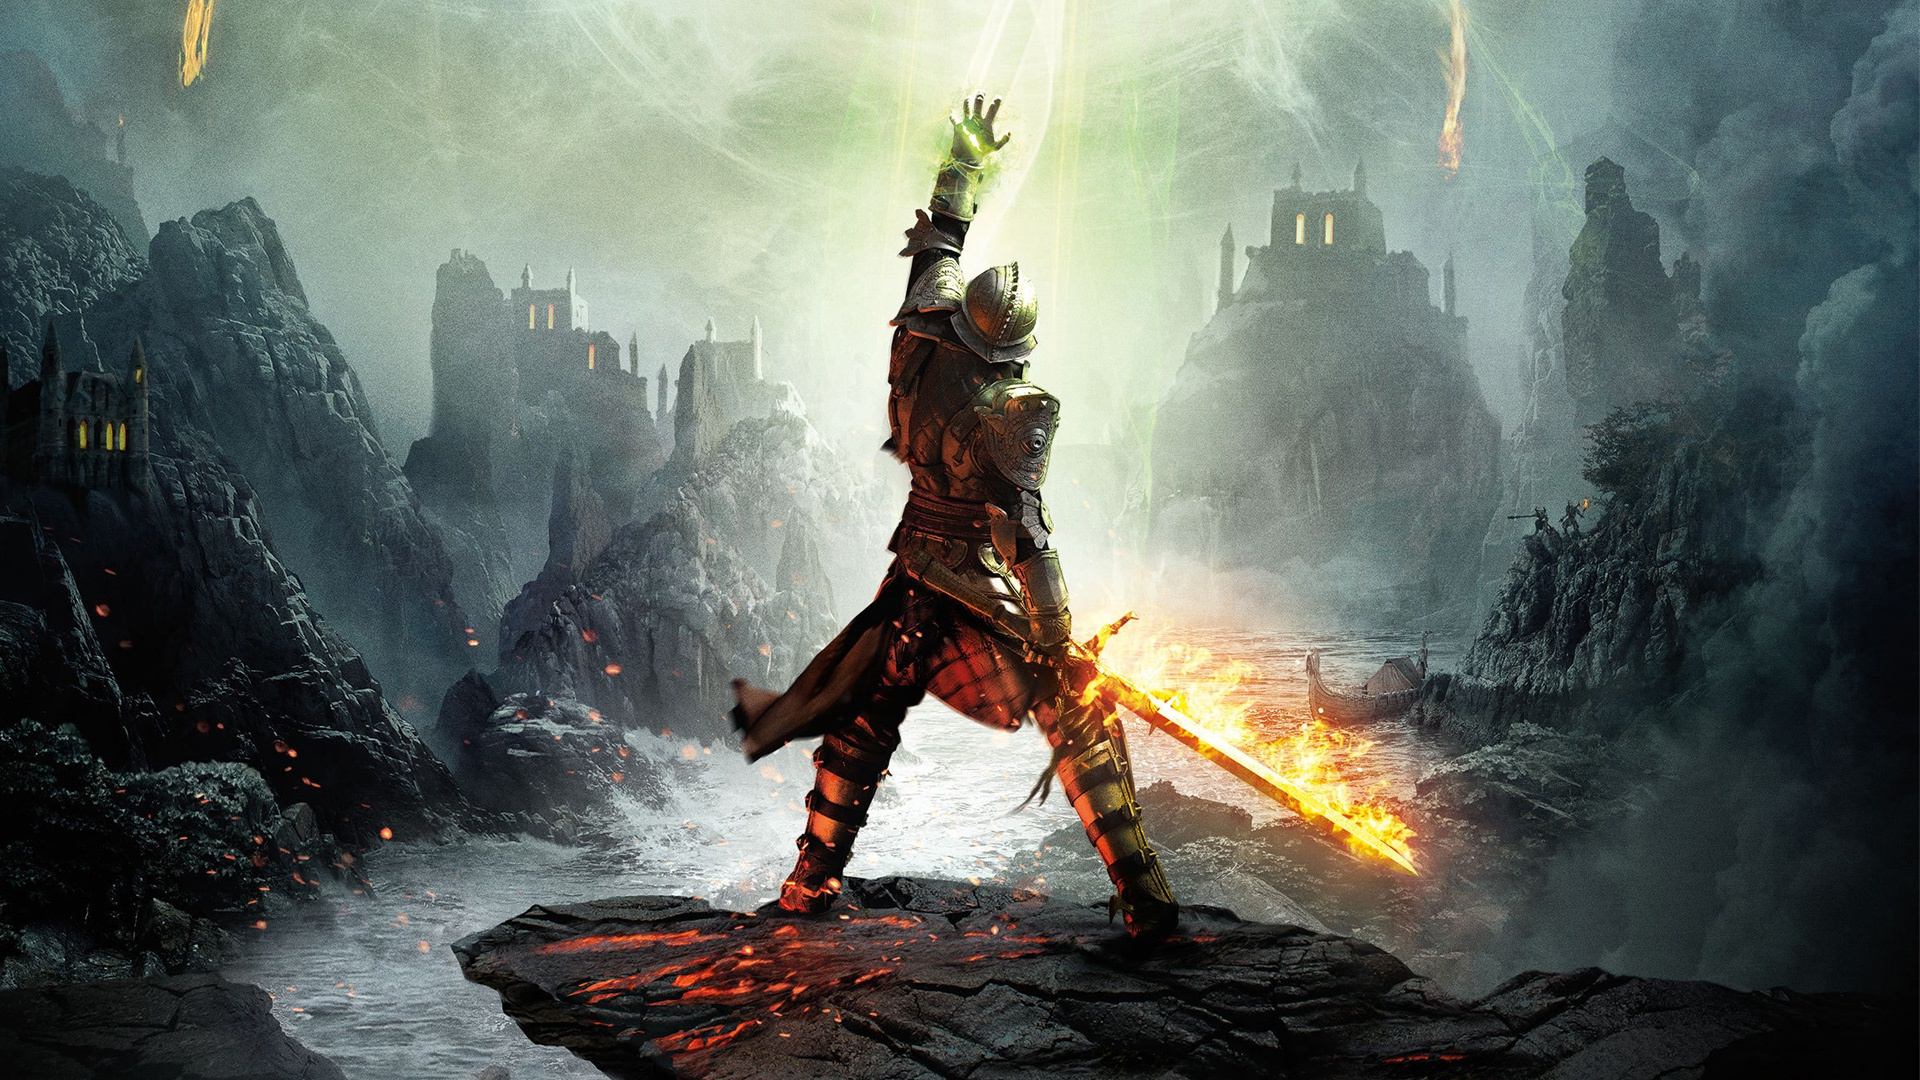 Dragon Age Inquisition Wallpapers IPhone Amazing Wallpaper Video